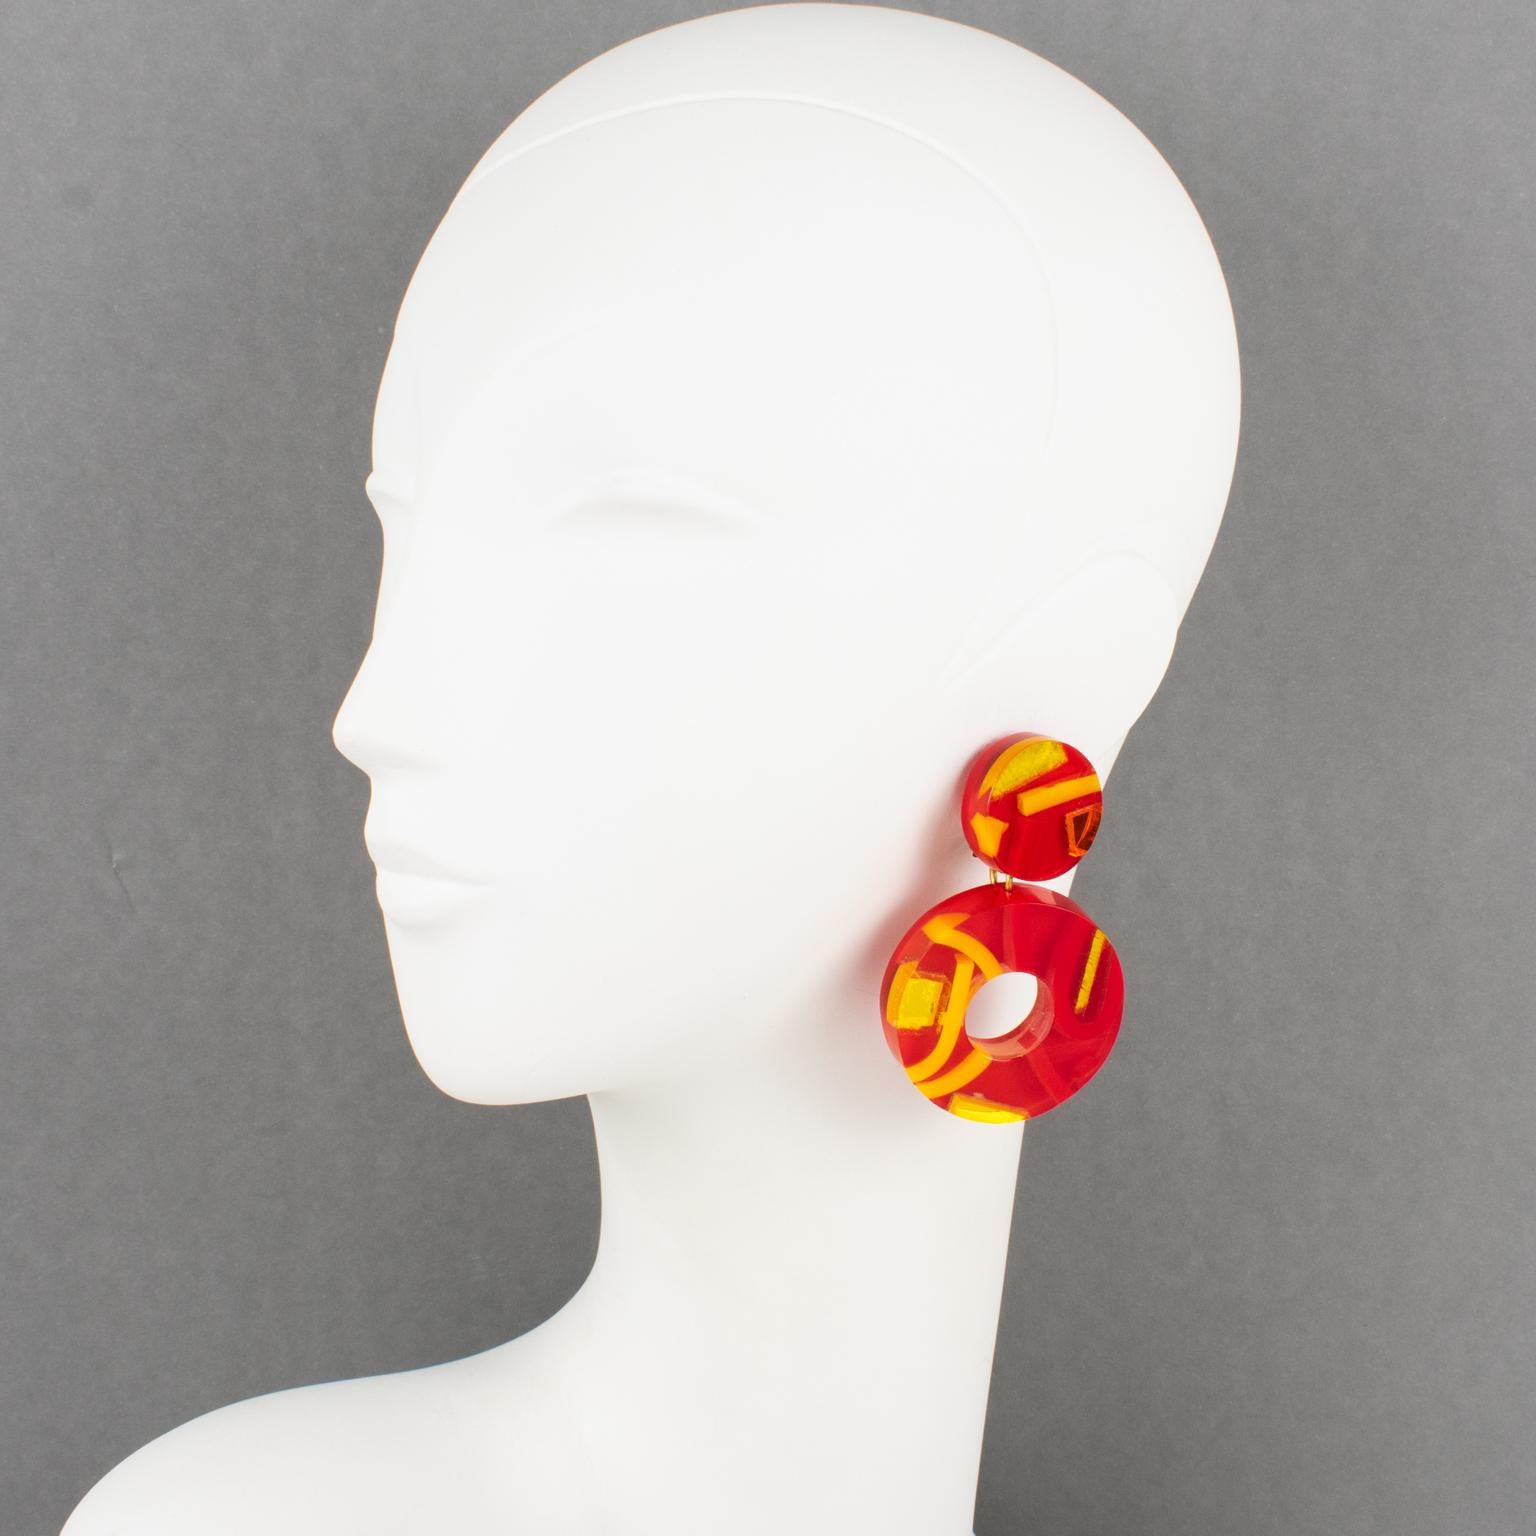 Harriet Bauknight designed those stunning lucite clip-on earrings for her brand Kaso in the 1980s. The massive donut dangling shape with a geometric design features dimensional multilayer Lucite elements with inclusions. The pieces boast a